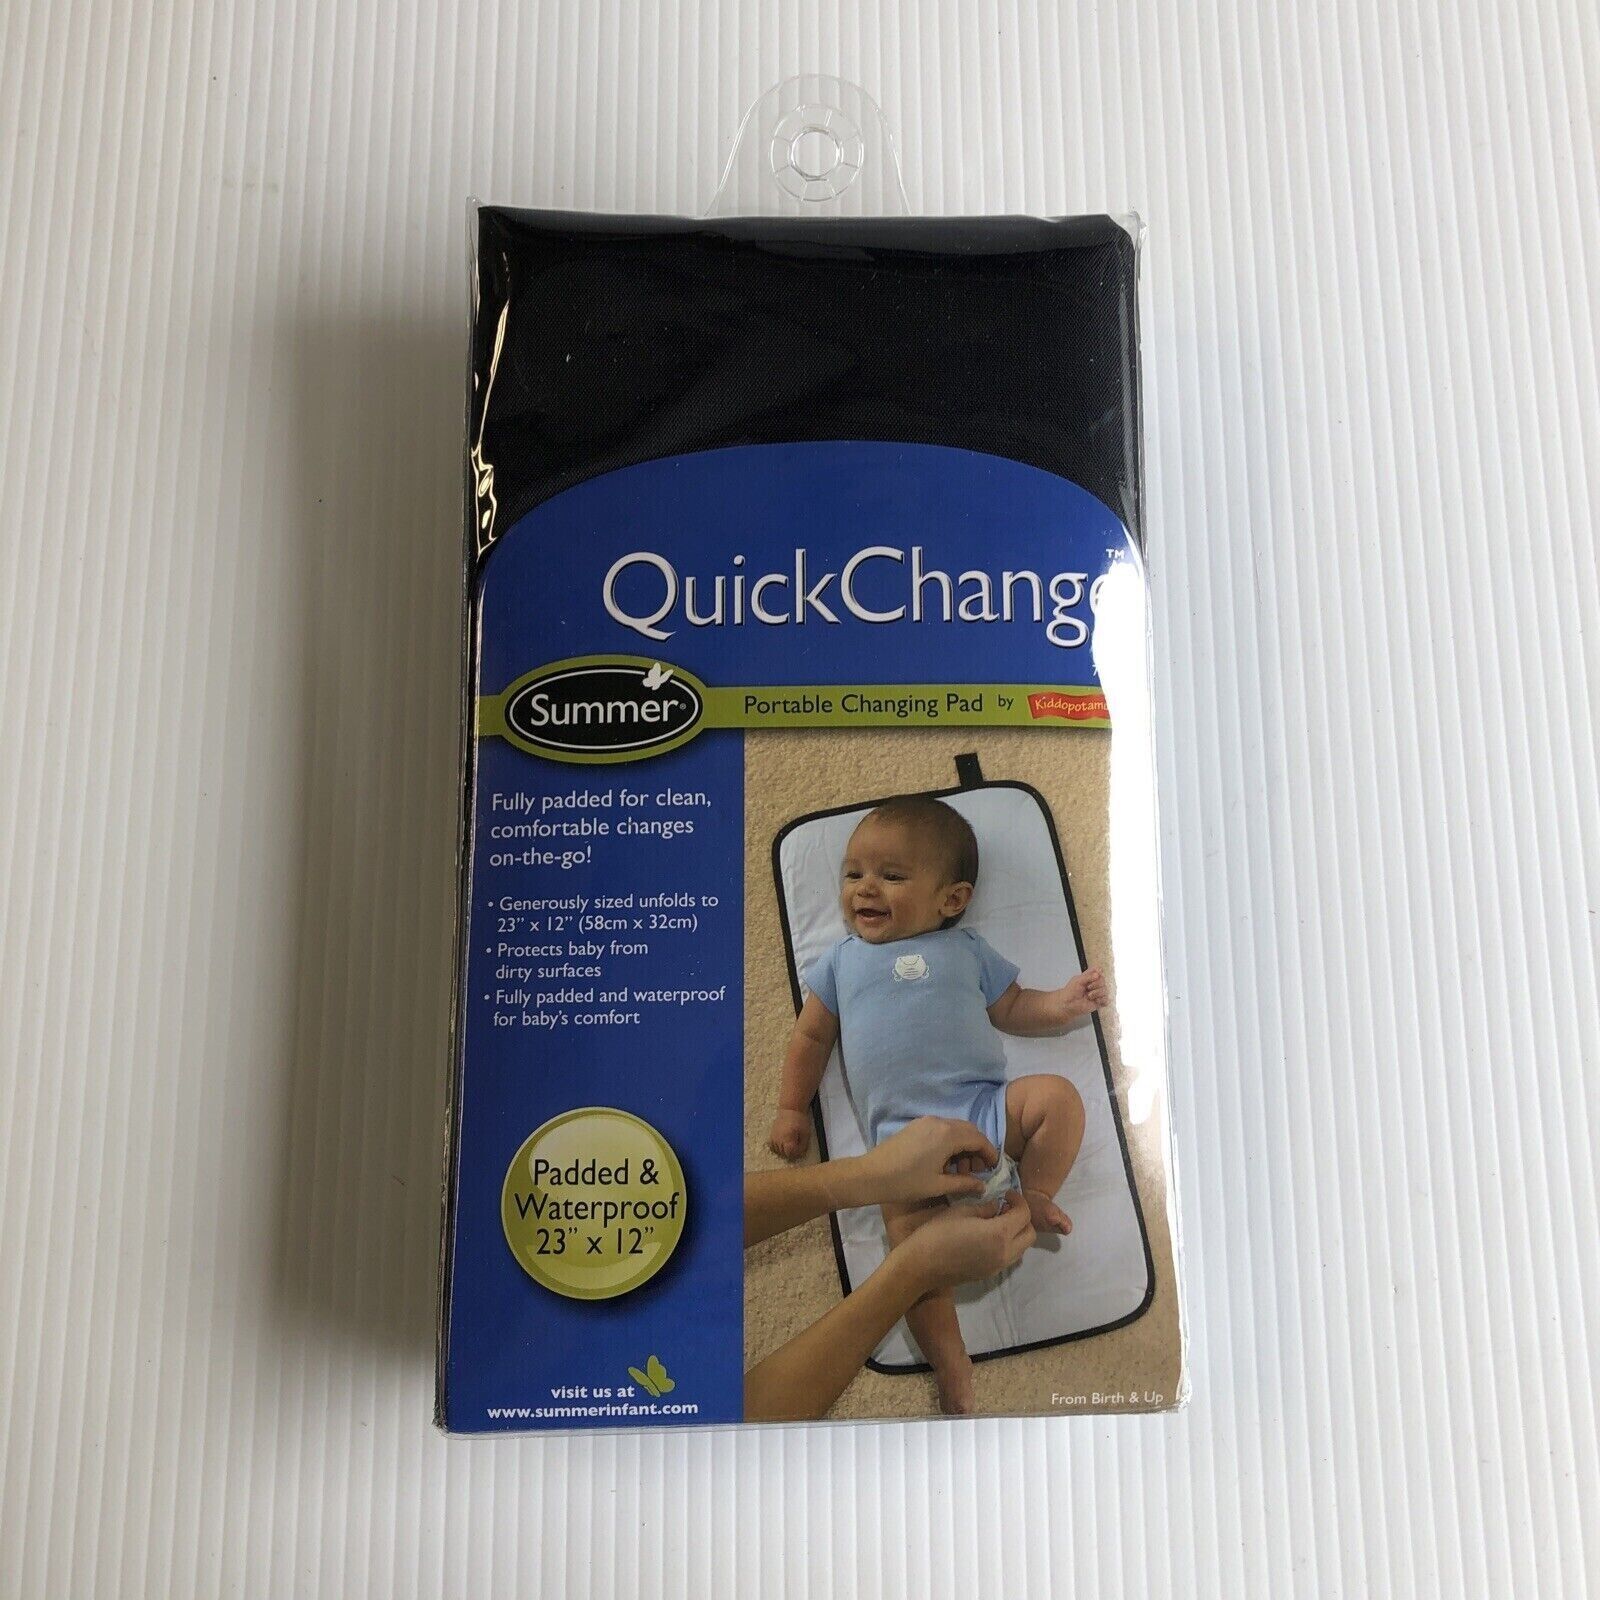 Summer Infant Quickchange Fully Padded Portable Changing Pad Black New In Pkg - $10.00